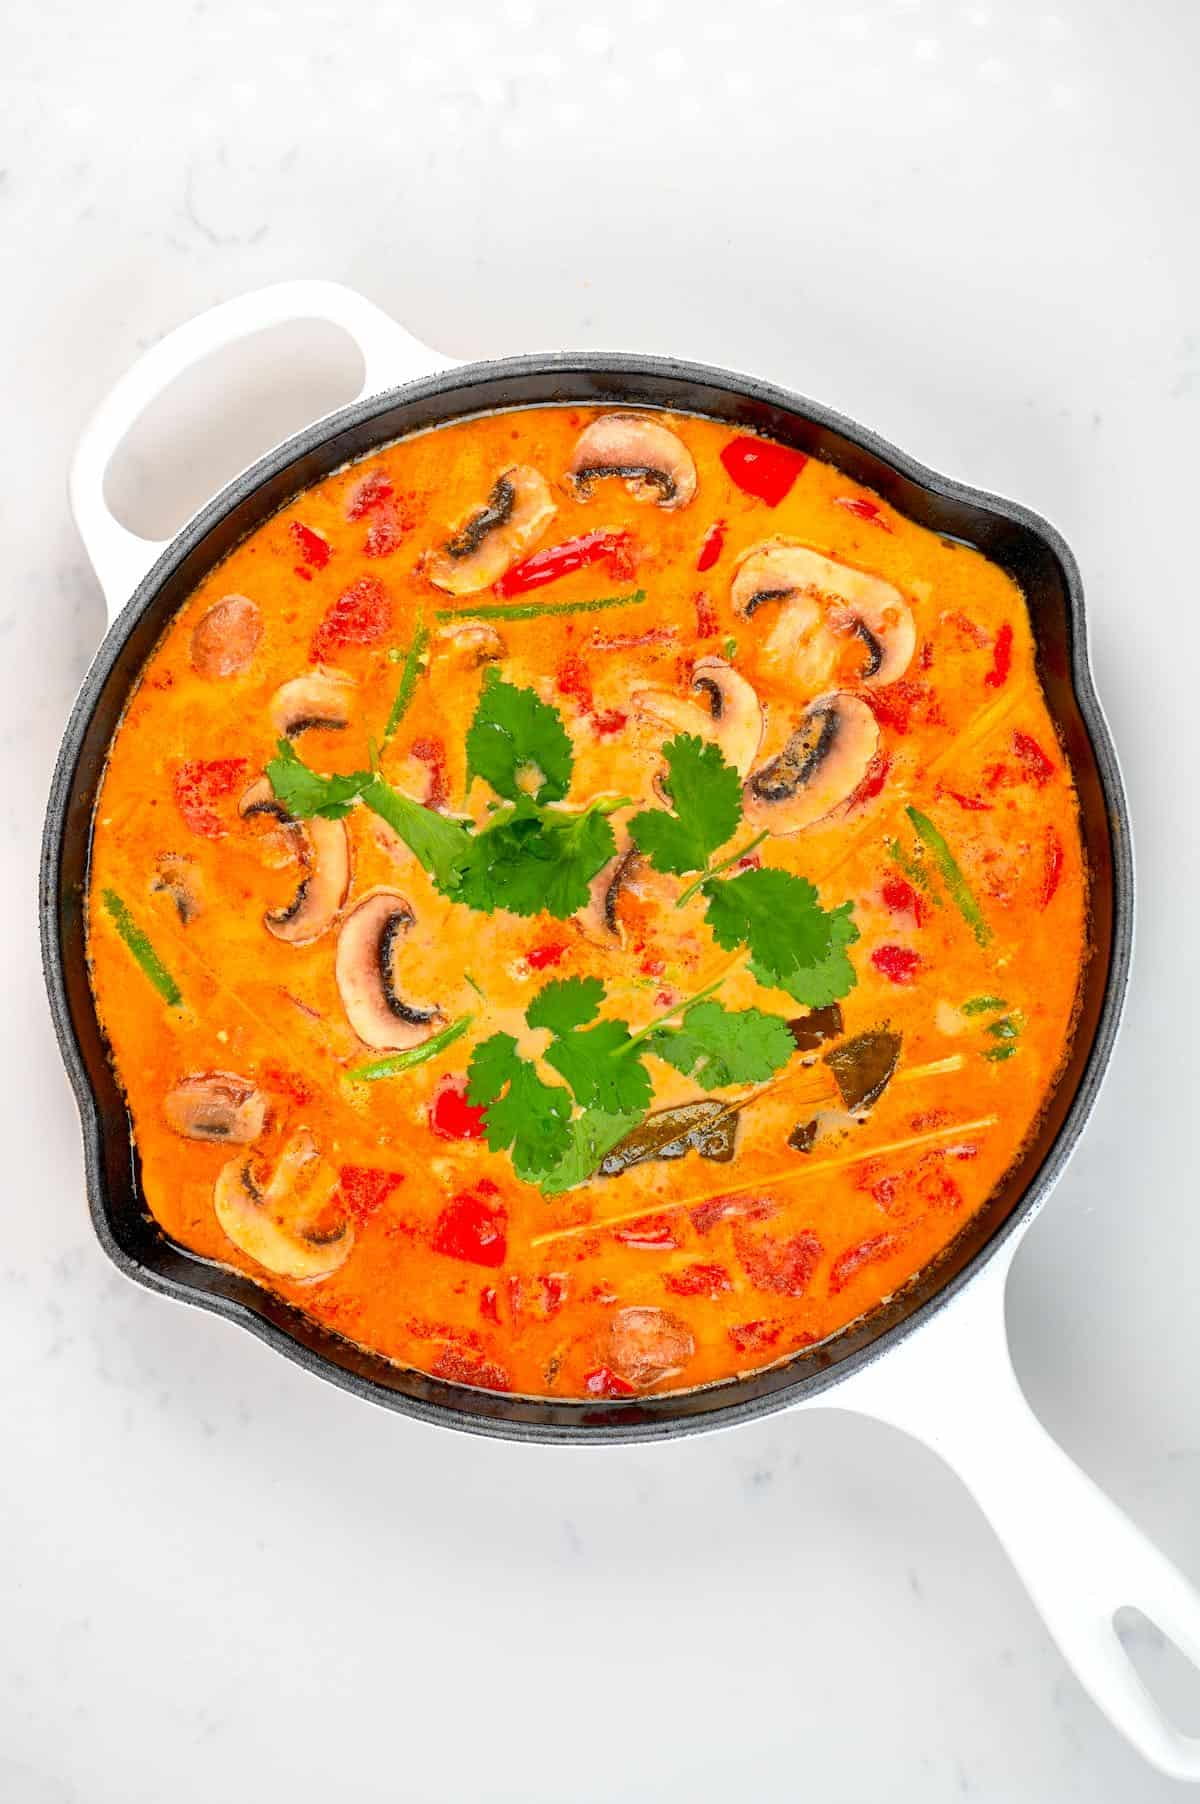 Overhead view of a big pan of creamy tom yum soup: mushrooms, tomatoes, cilantro and basil floating in a creamy, orange soup